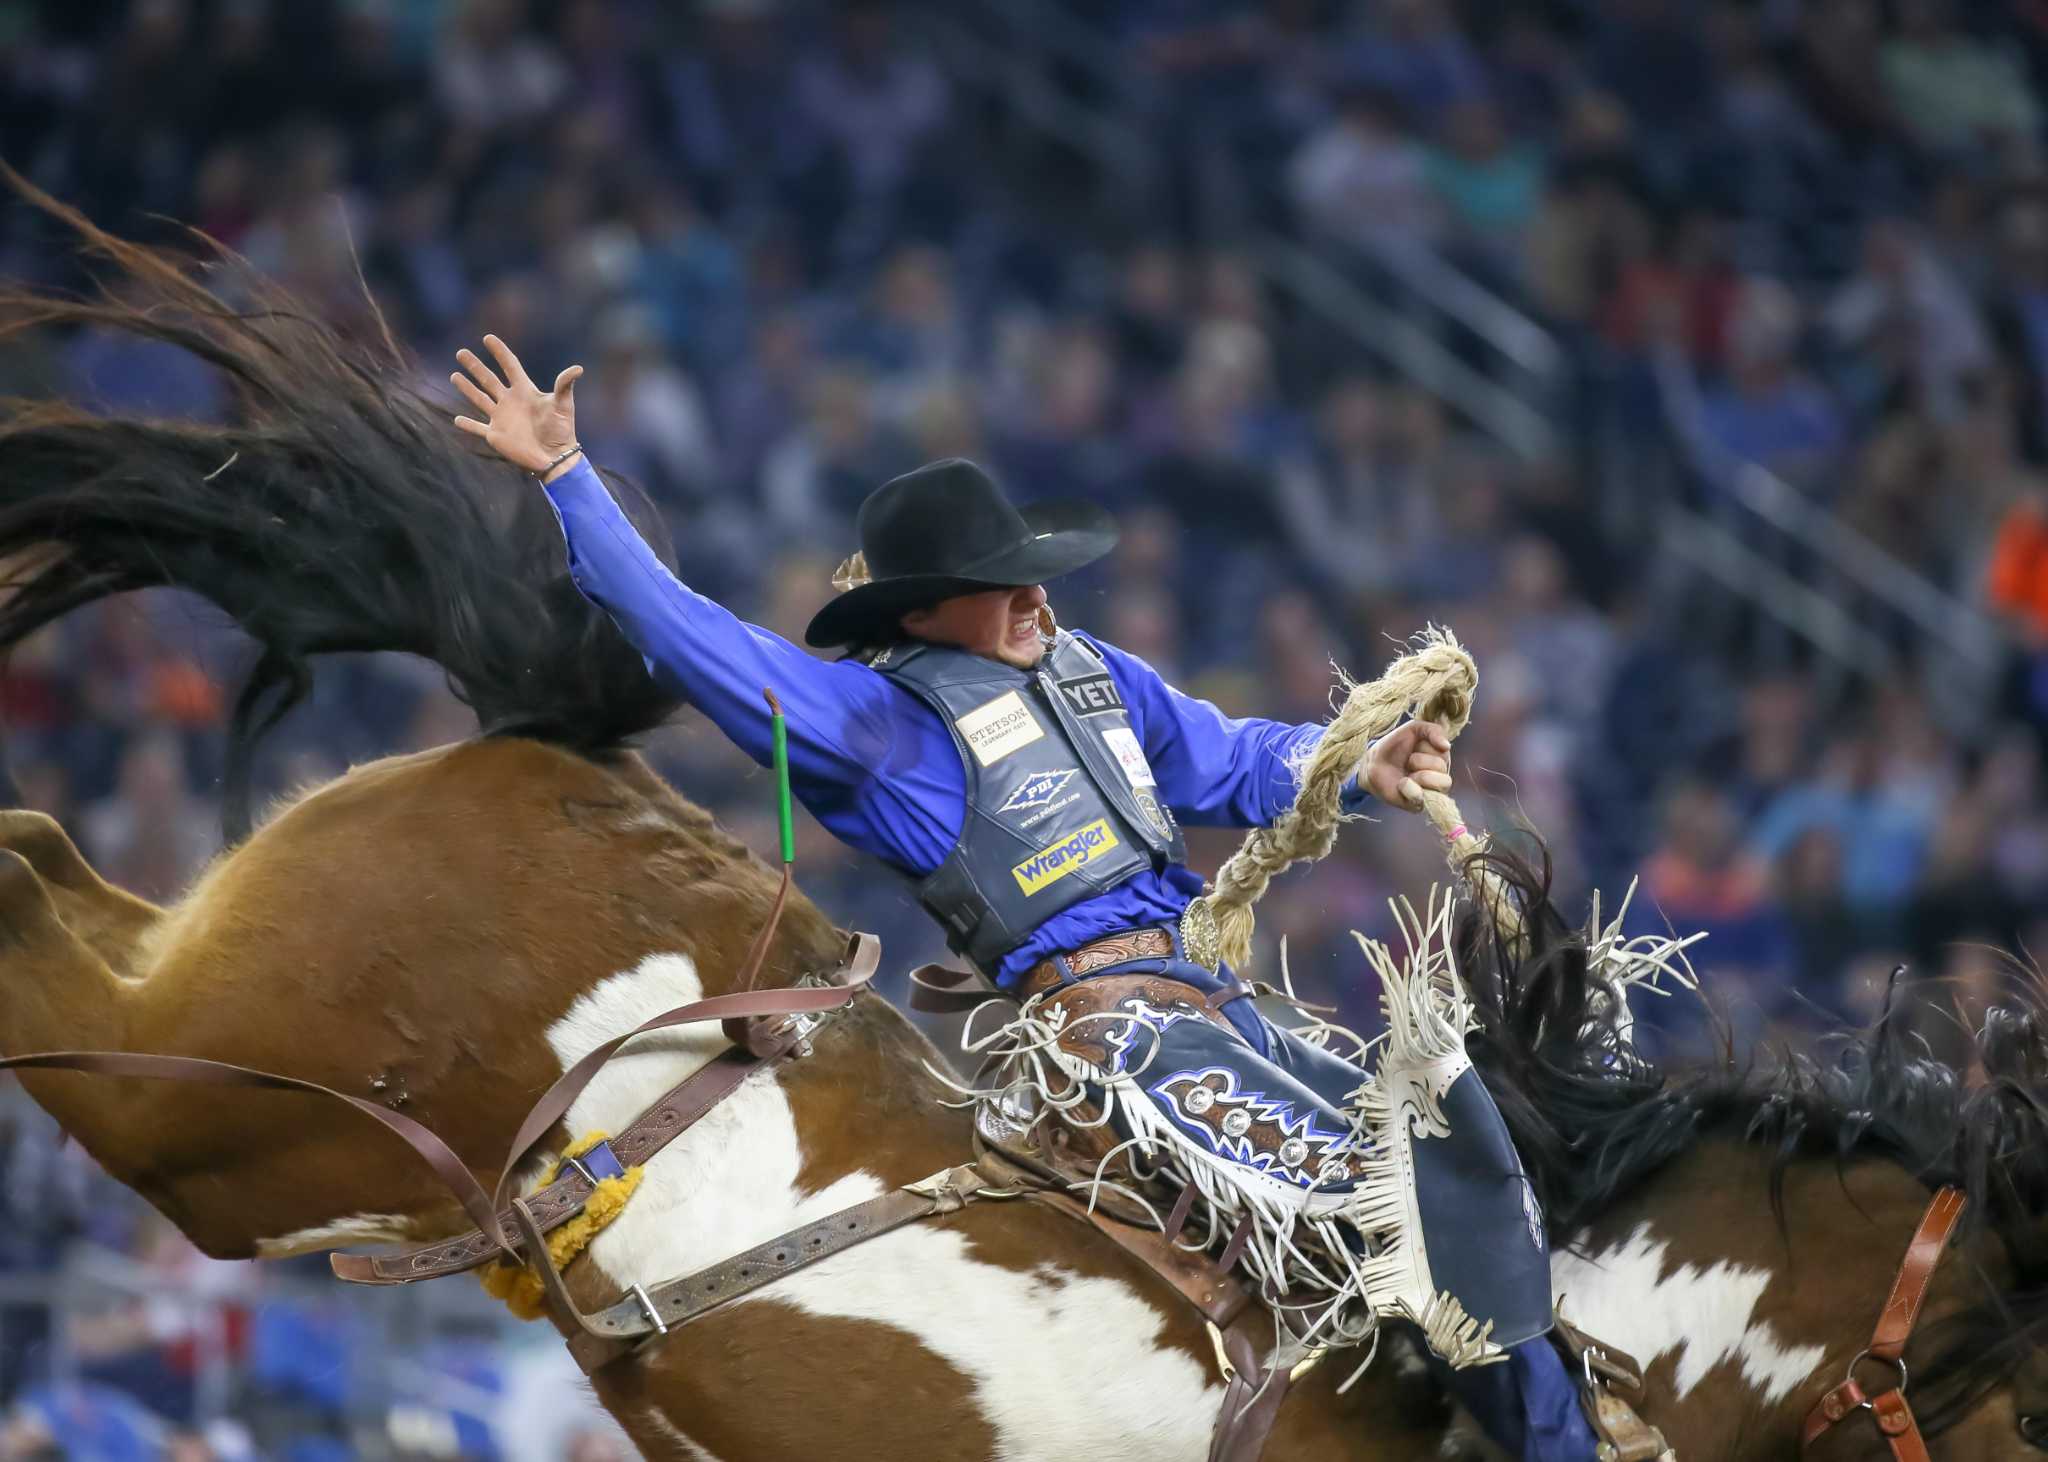 Utah’s Wright brothers give saddlebronc riding a run for the money